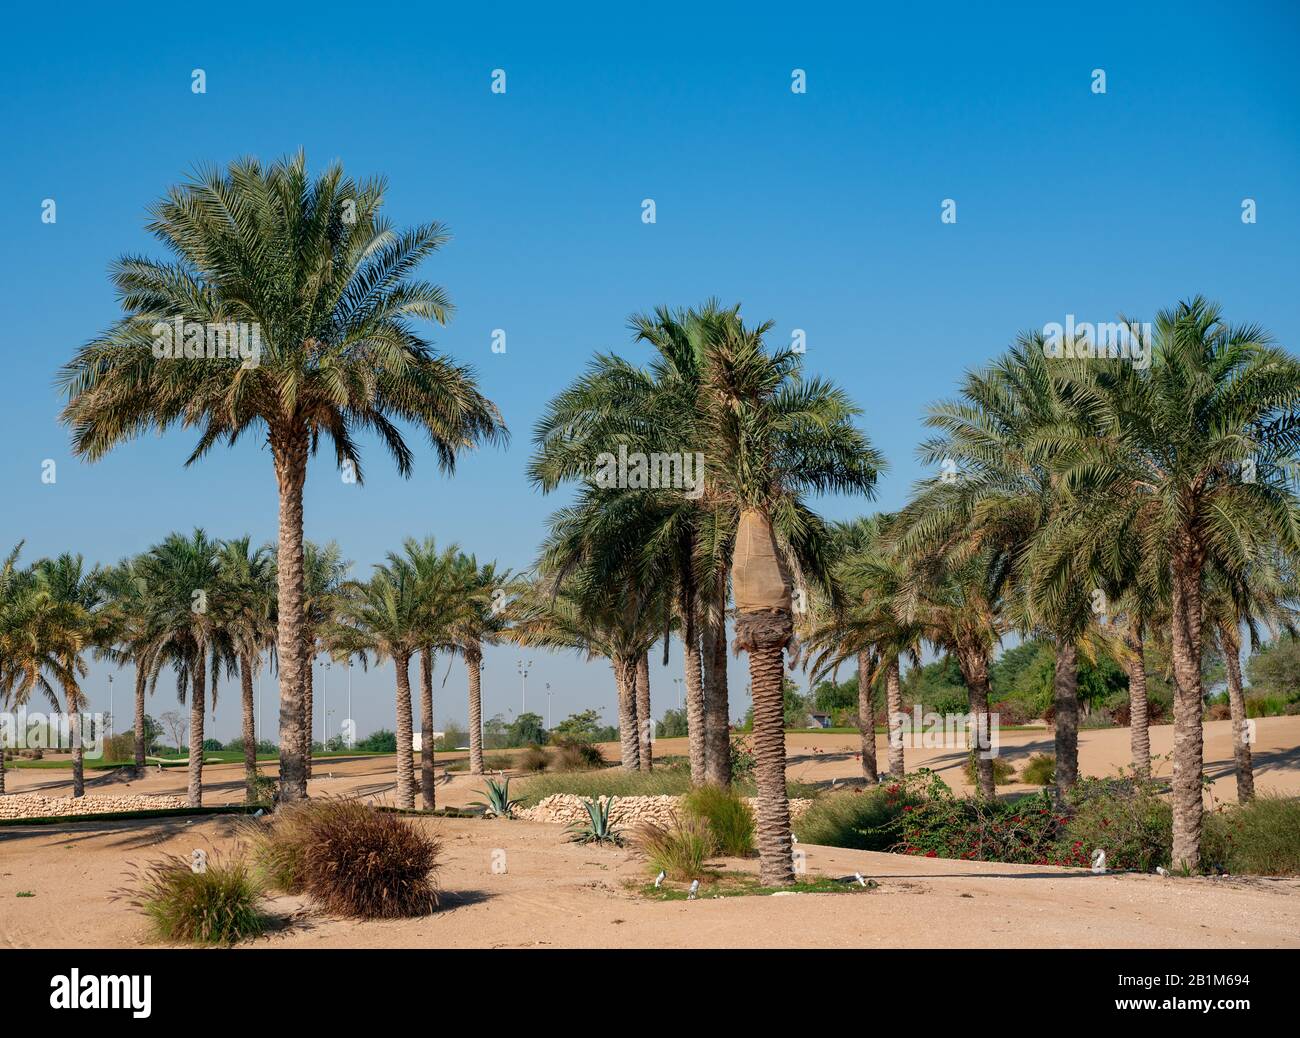 Panorama. Plantation of date palms. The image depicts advanced tropical agriculture in the Arab countries Stock Photo